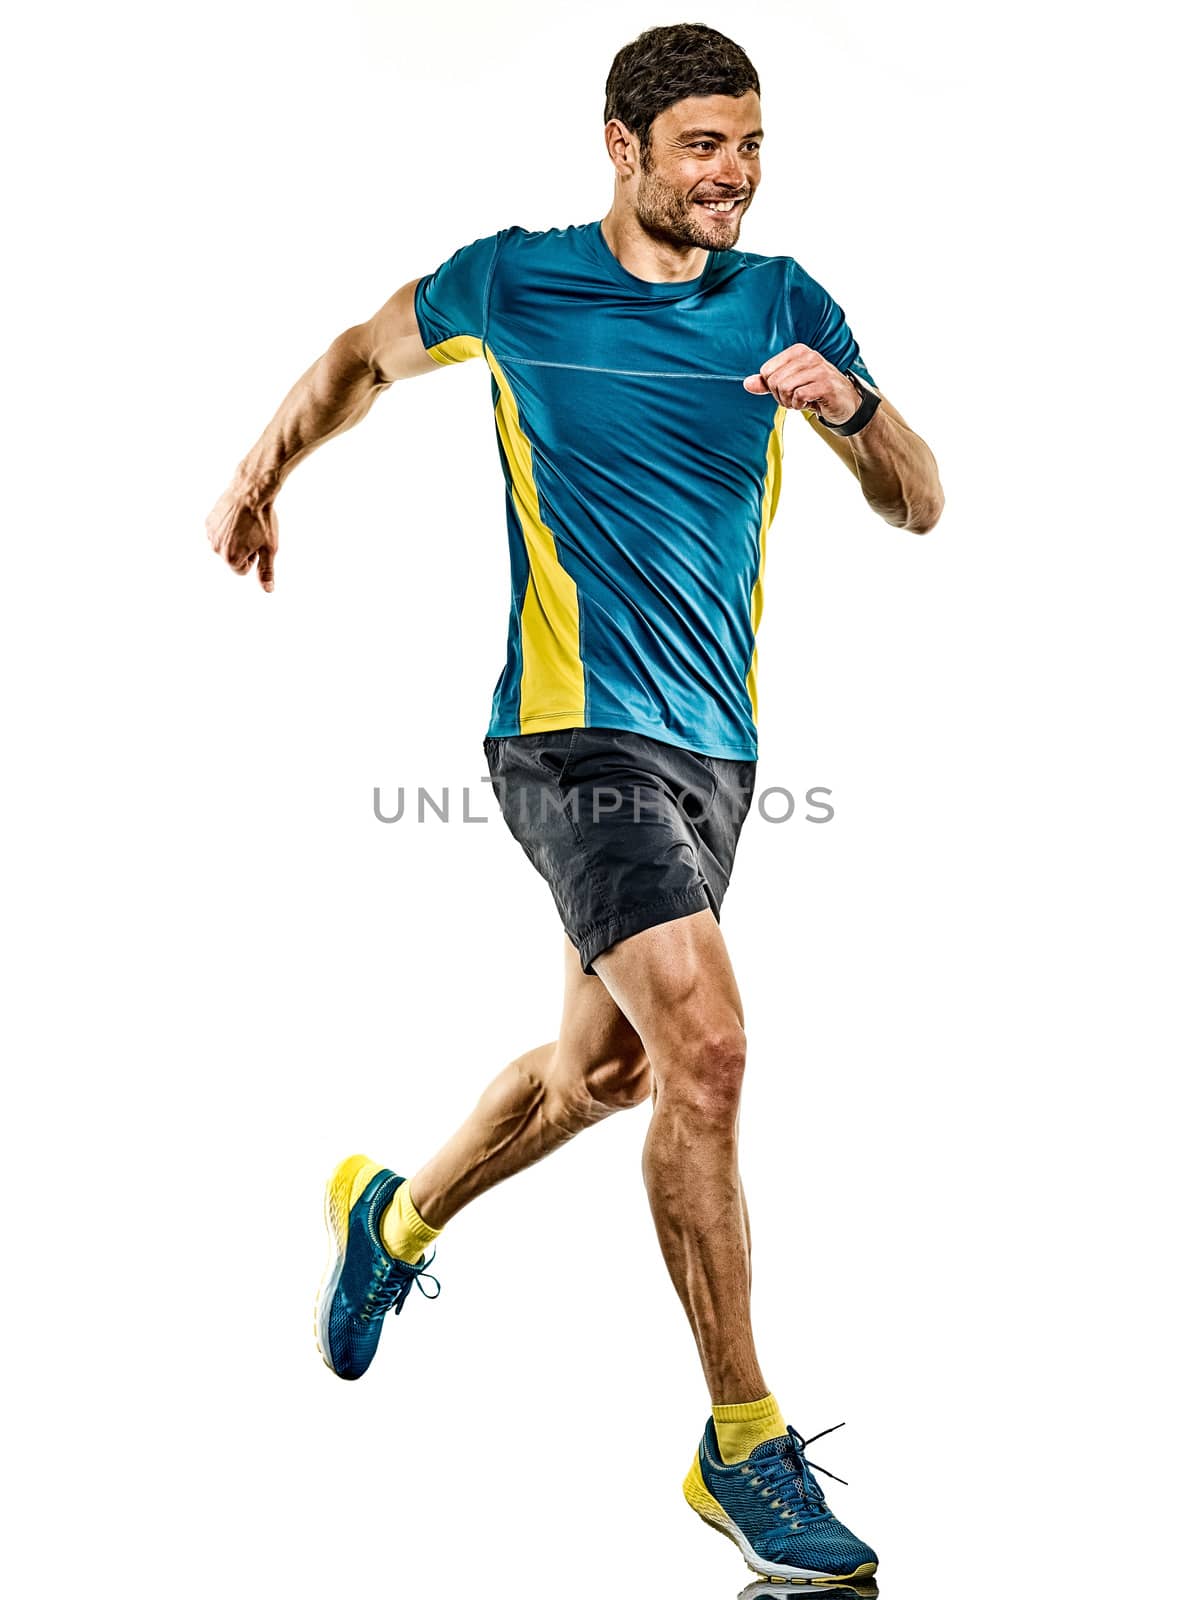 one caucasian handsome mature man running runner jogging jogger isolated on white background